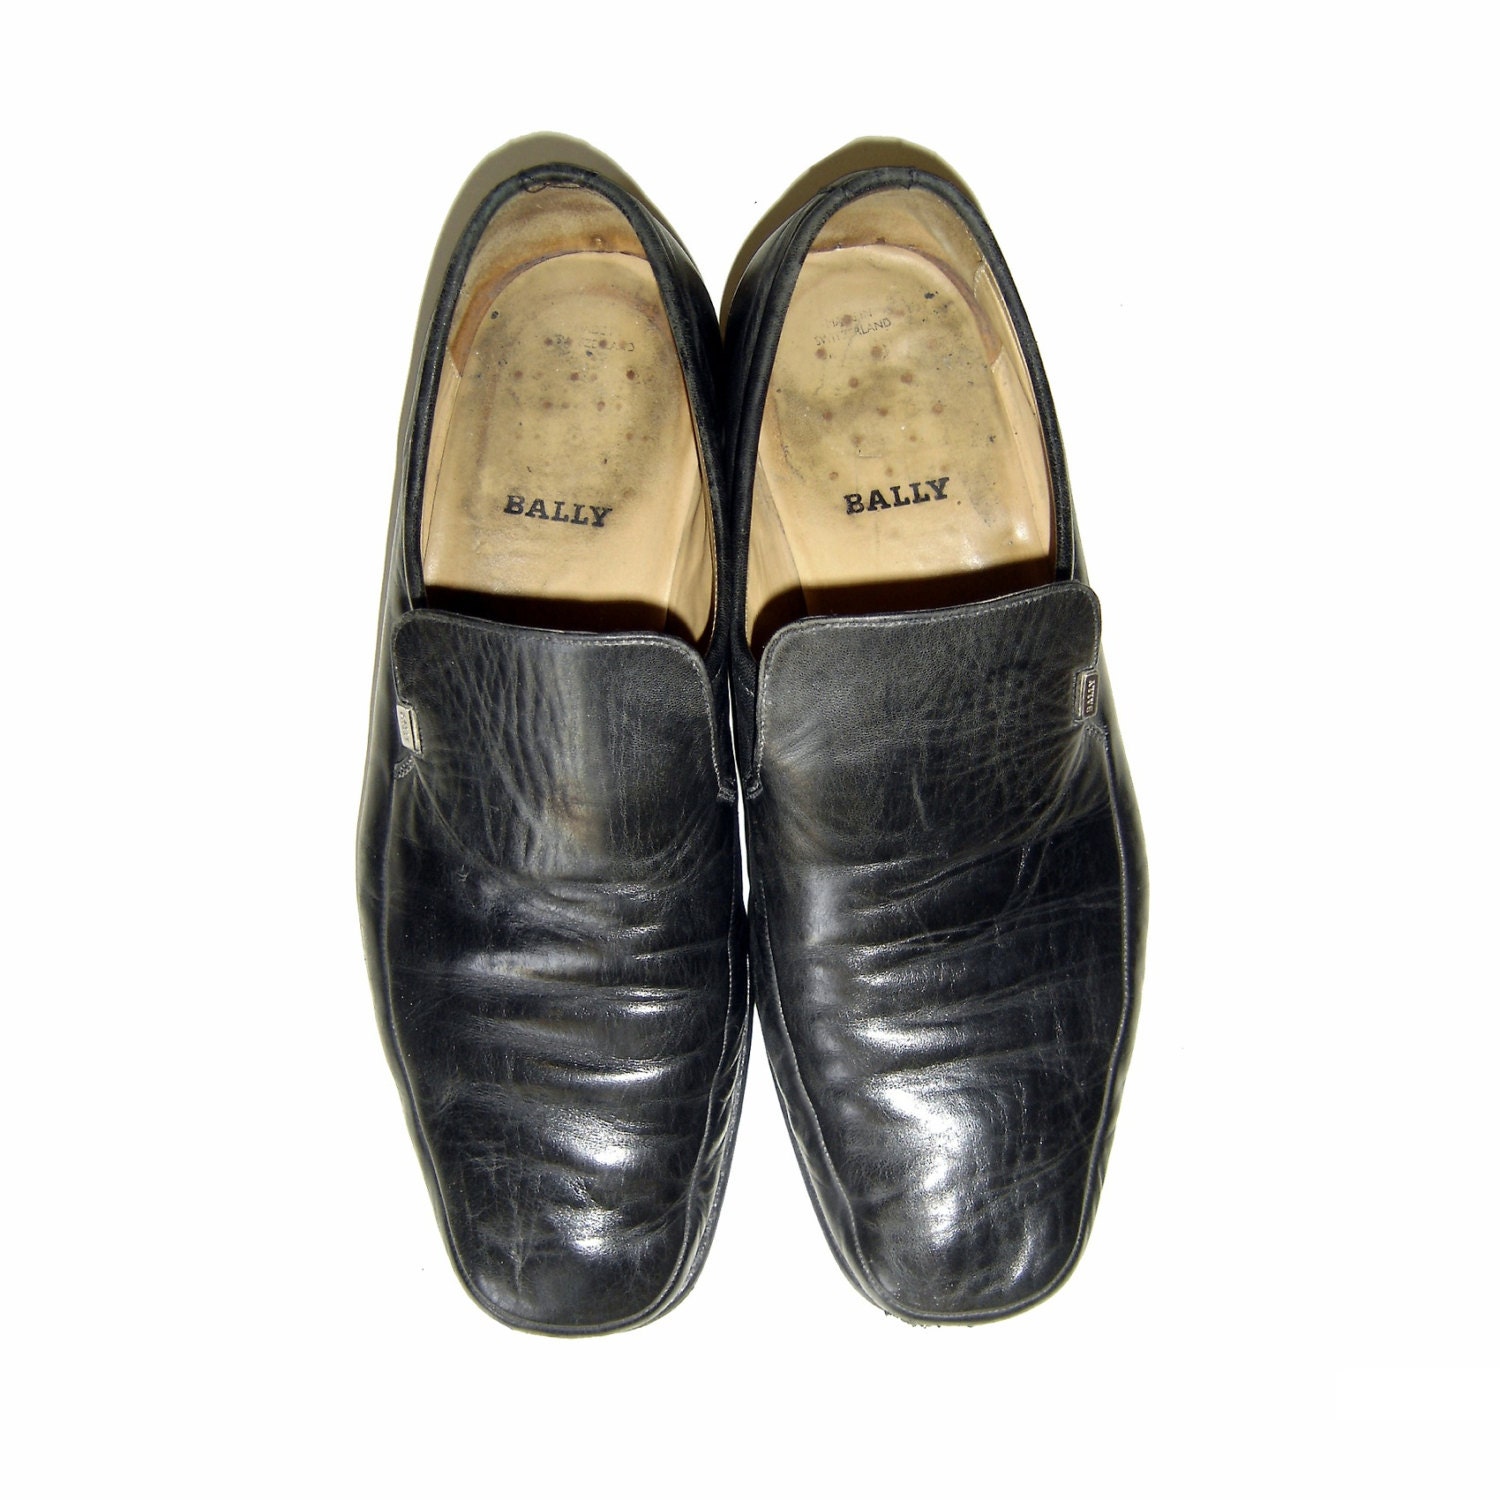 Vintage BALLY Black Leather Shoes Size Mens 9 by RockywayVintage